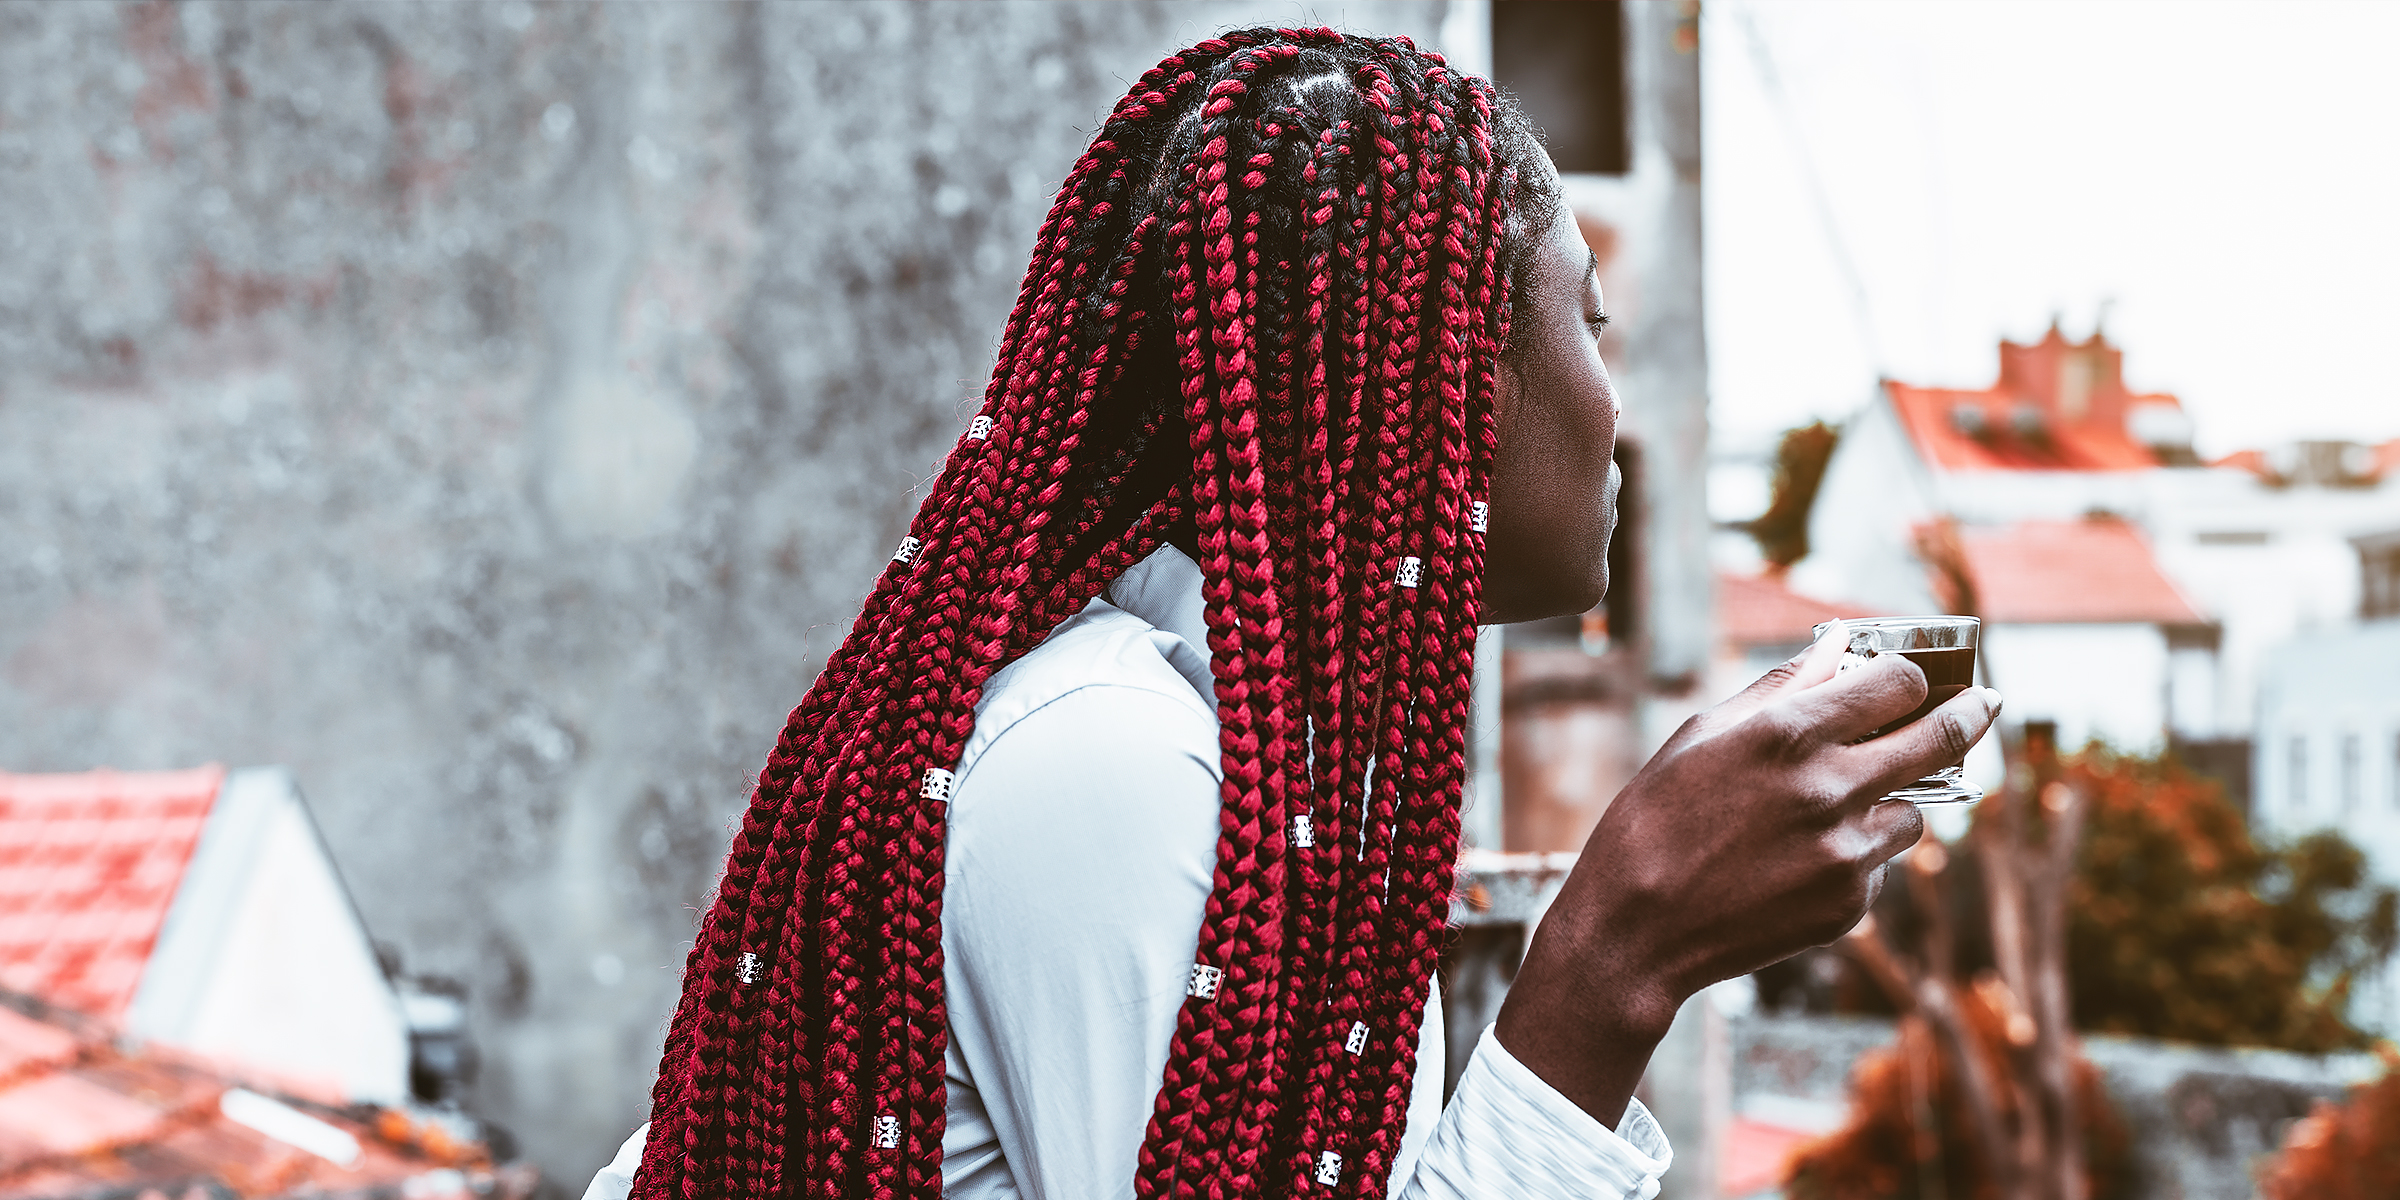 A woman with red box braids | Source: Shutterstock